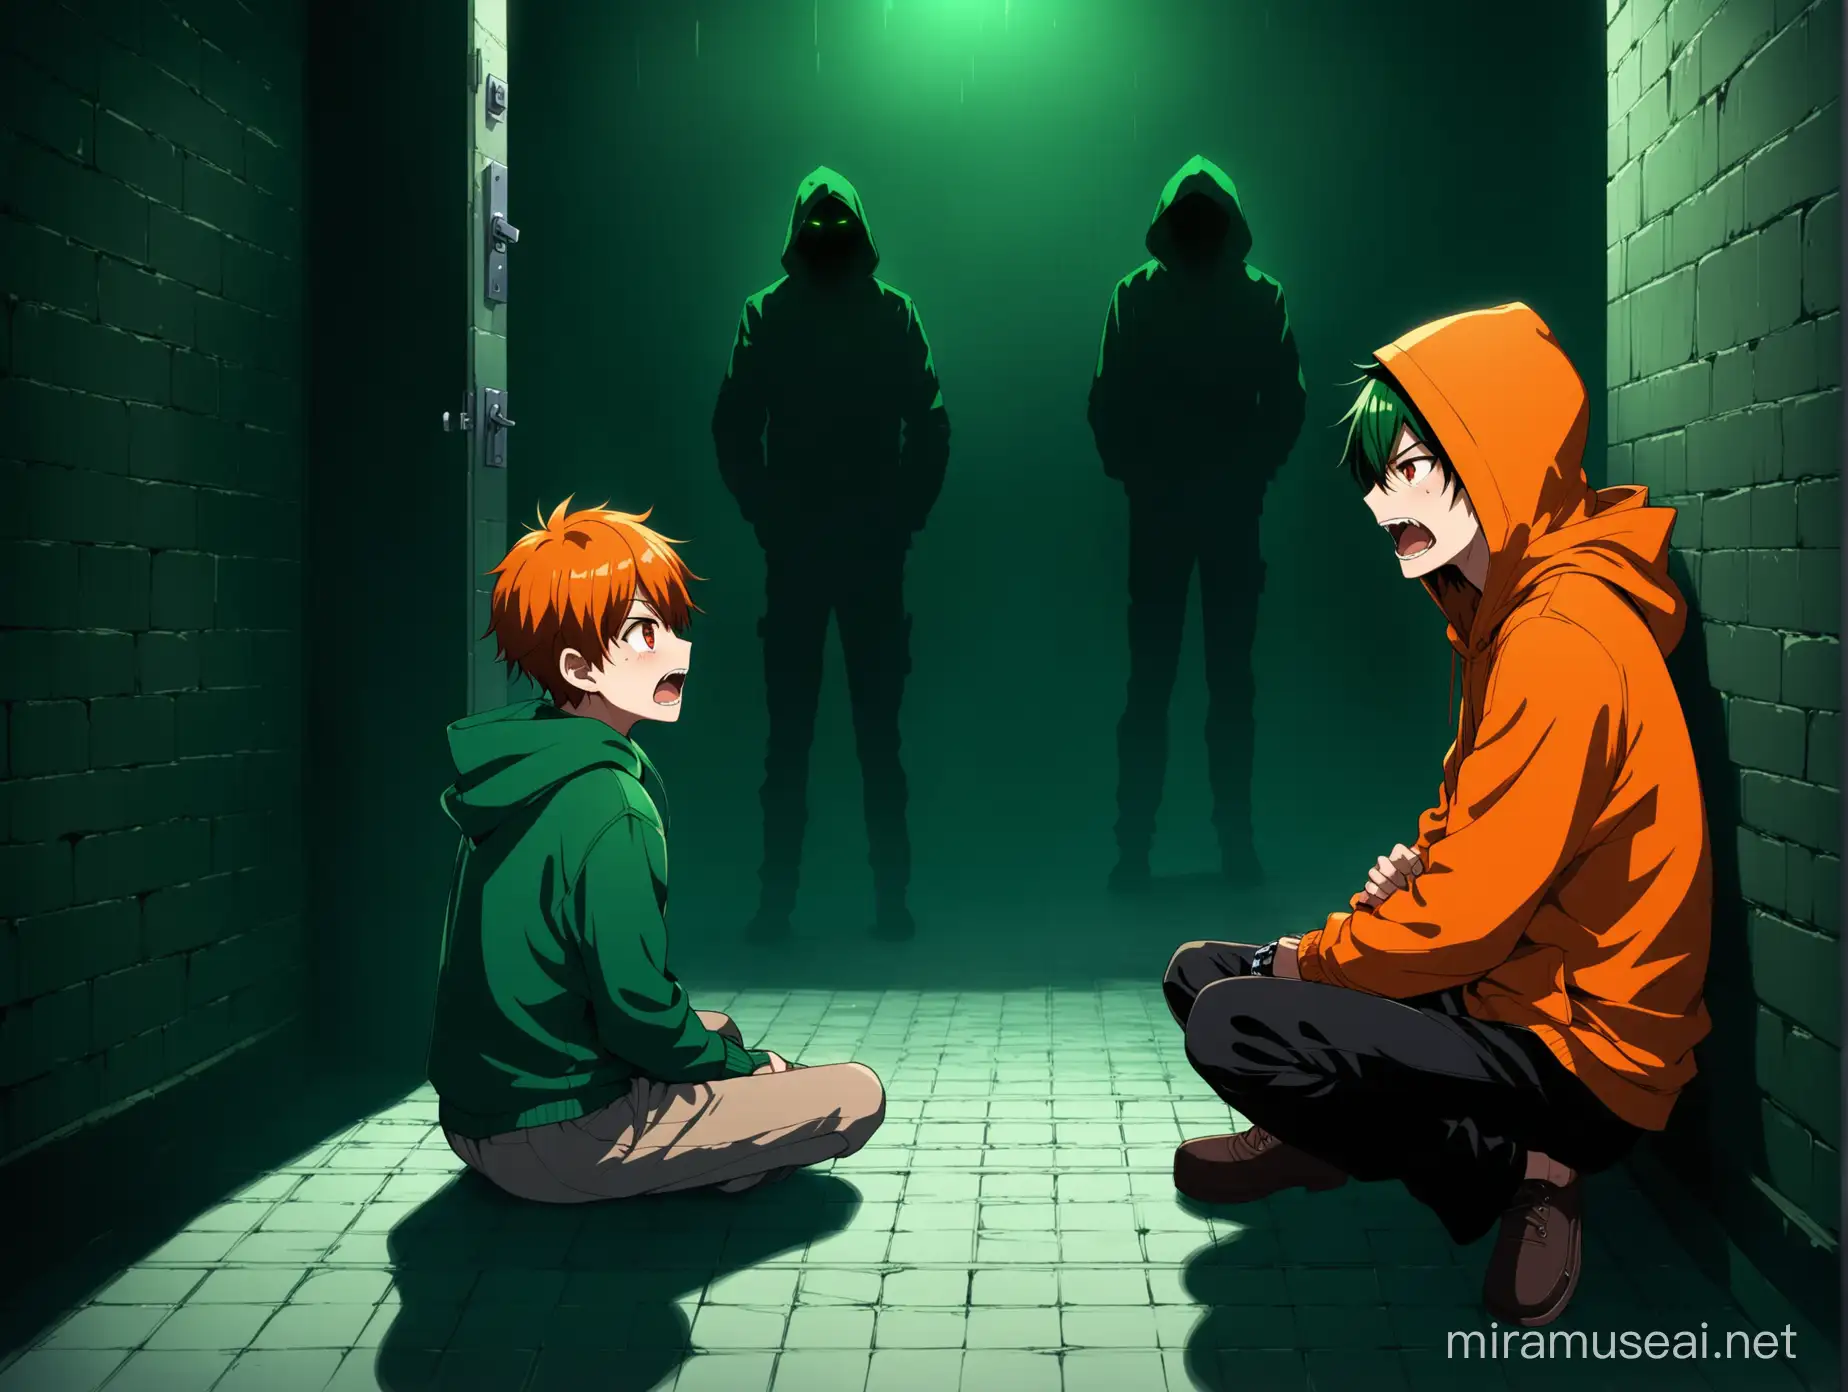 Back View image of two anime characters having conversation with each other in an underground secret room with dark green contrasts and vibe. First anime boy character is sitting on the floor handcuffed, crying and screaming. He is handsome, orange headed, orange eyes, wearing green hoodie, shocked, scared, crying. Another character is evil male criminal anime character with evil intentions who is talking while standing beside the first boy character who is handcuffed. The criminal character is evil criminal, dark green headed, red eyes, dreadful smile, wearing dark green hoodie. The backview image is of a boy handcuffed sitting on a floor of underground secret room with dark green contrasts and vibe listening the evil intentions of the criminal character. The criminal is facing the boy character so the face of him is not visible and back is visible. The criminal is standing beside the boy